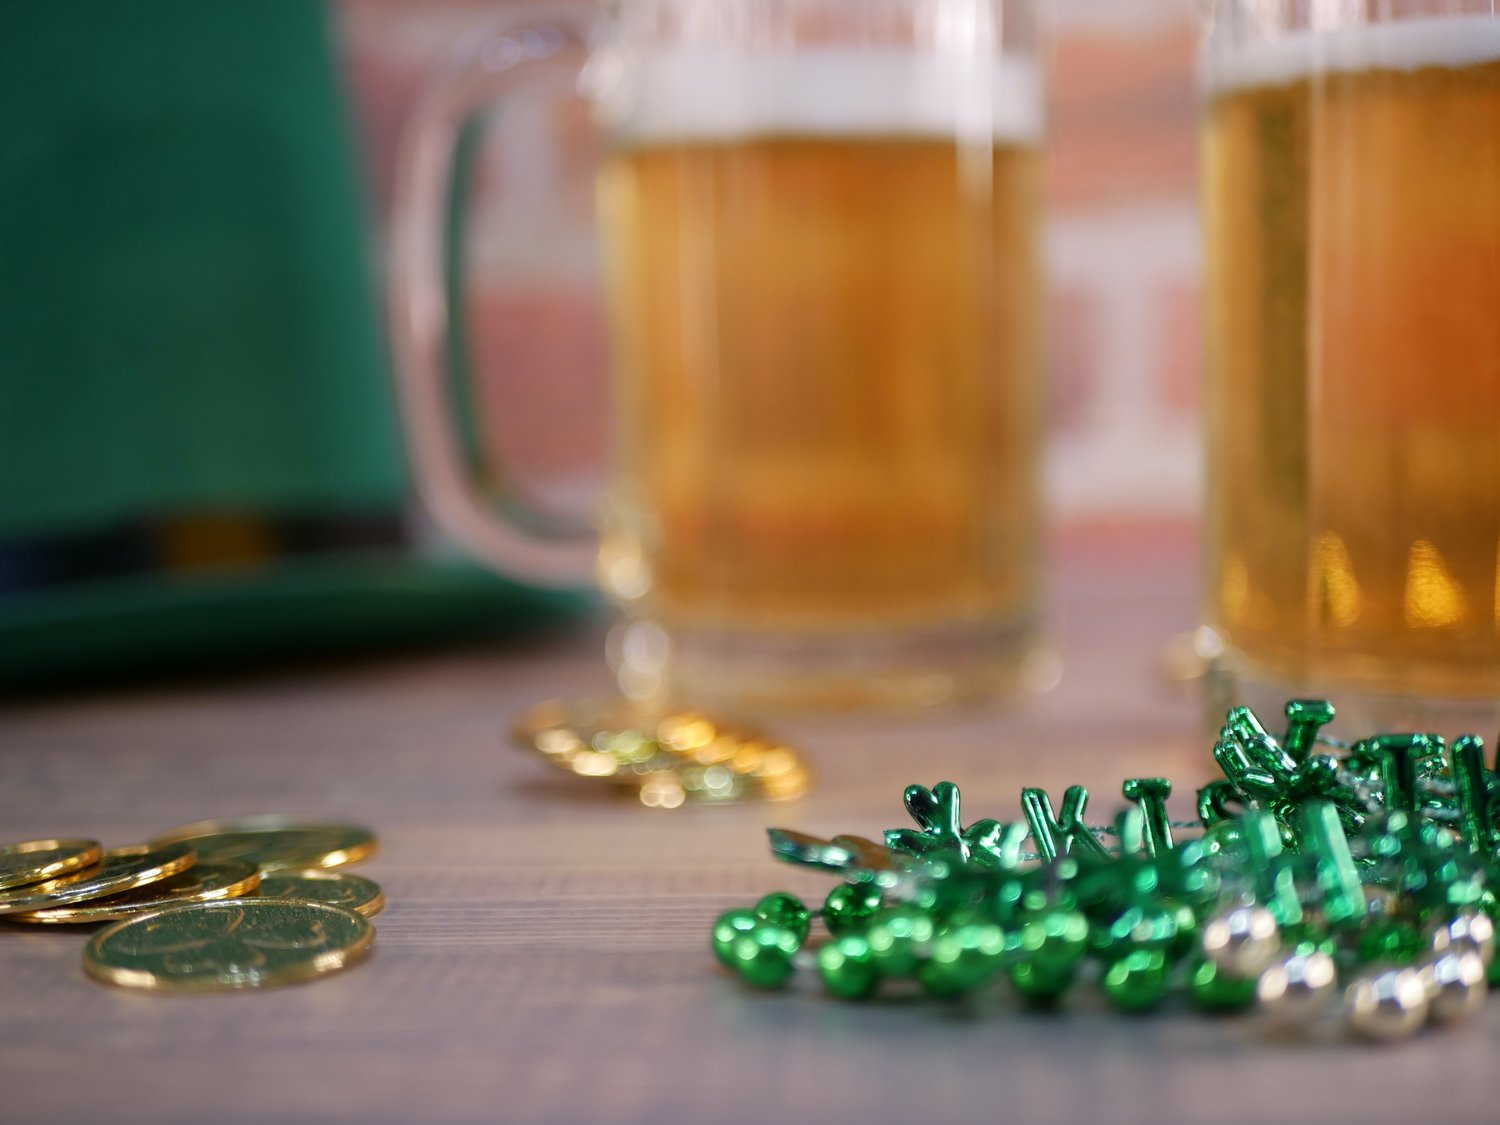 During last year’s weeklong observance of St. Patrick’s Day, 225 alcohol-related crashes resulting in 11 deaths occurred on North Carolina roads, according to the state,